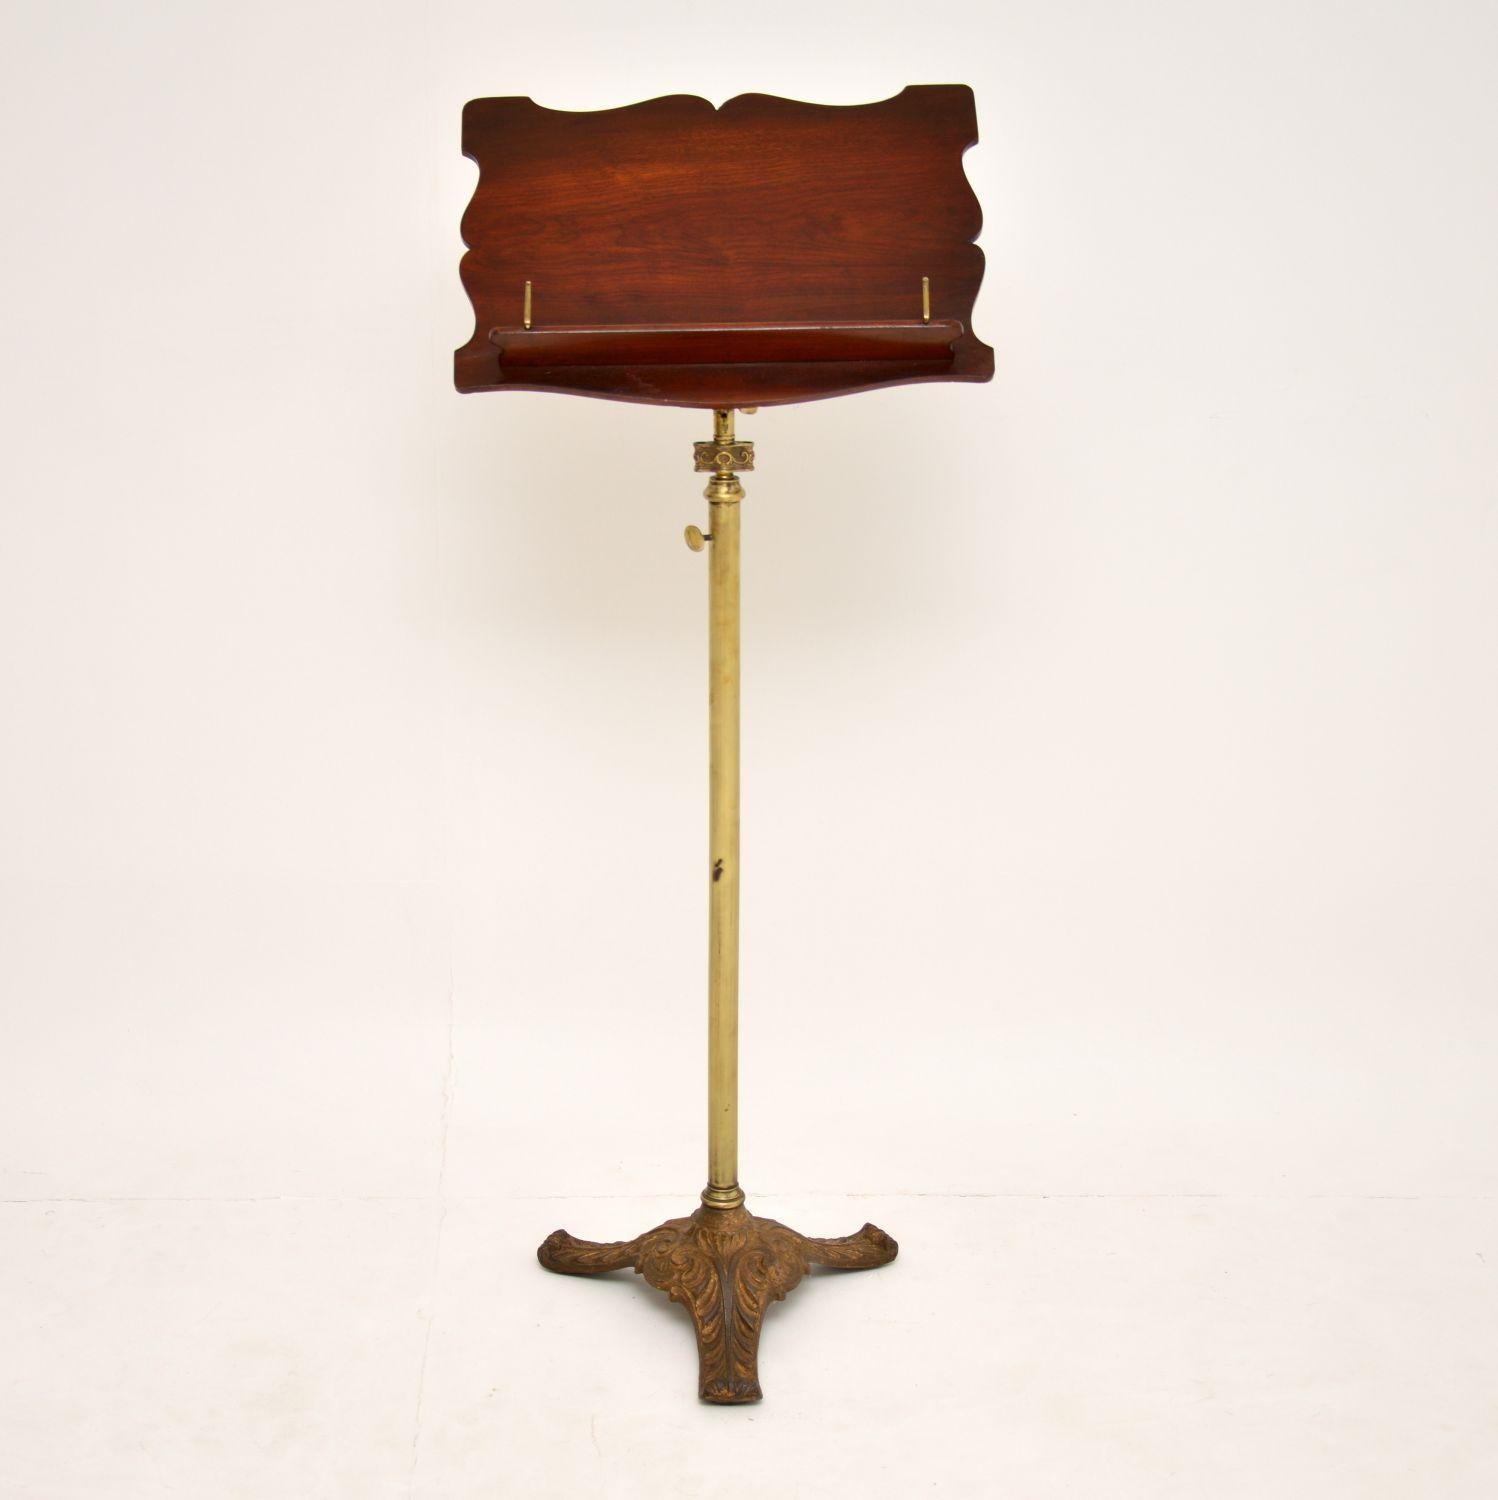 Antique Victorian mahogany & brass reading or music stand, in good condition & dating to around the 1860’s period.

The top section is mahogany & is adjustable. The upright brass stand also has a height adjustment system. The heavy base section is